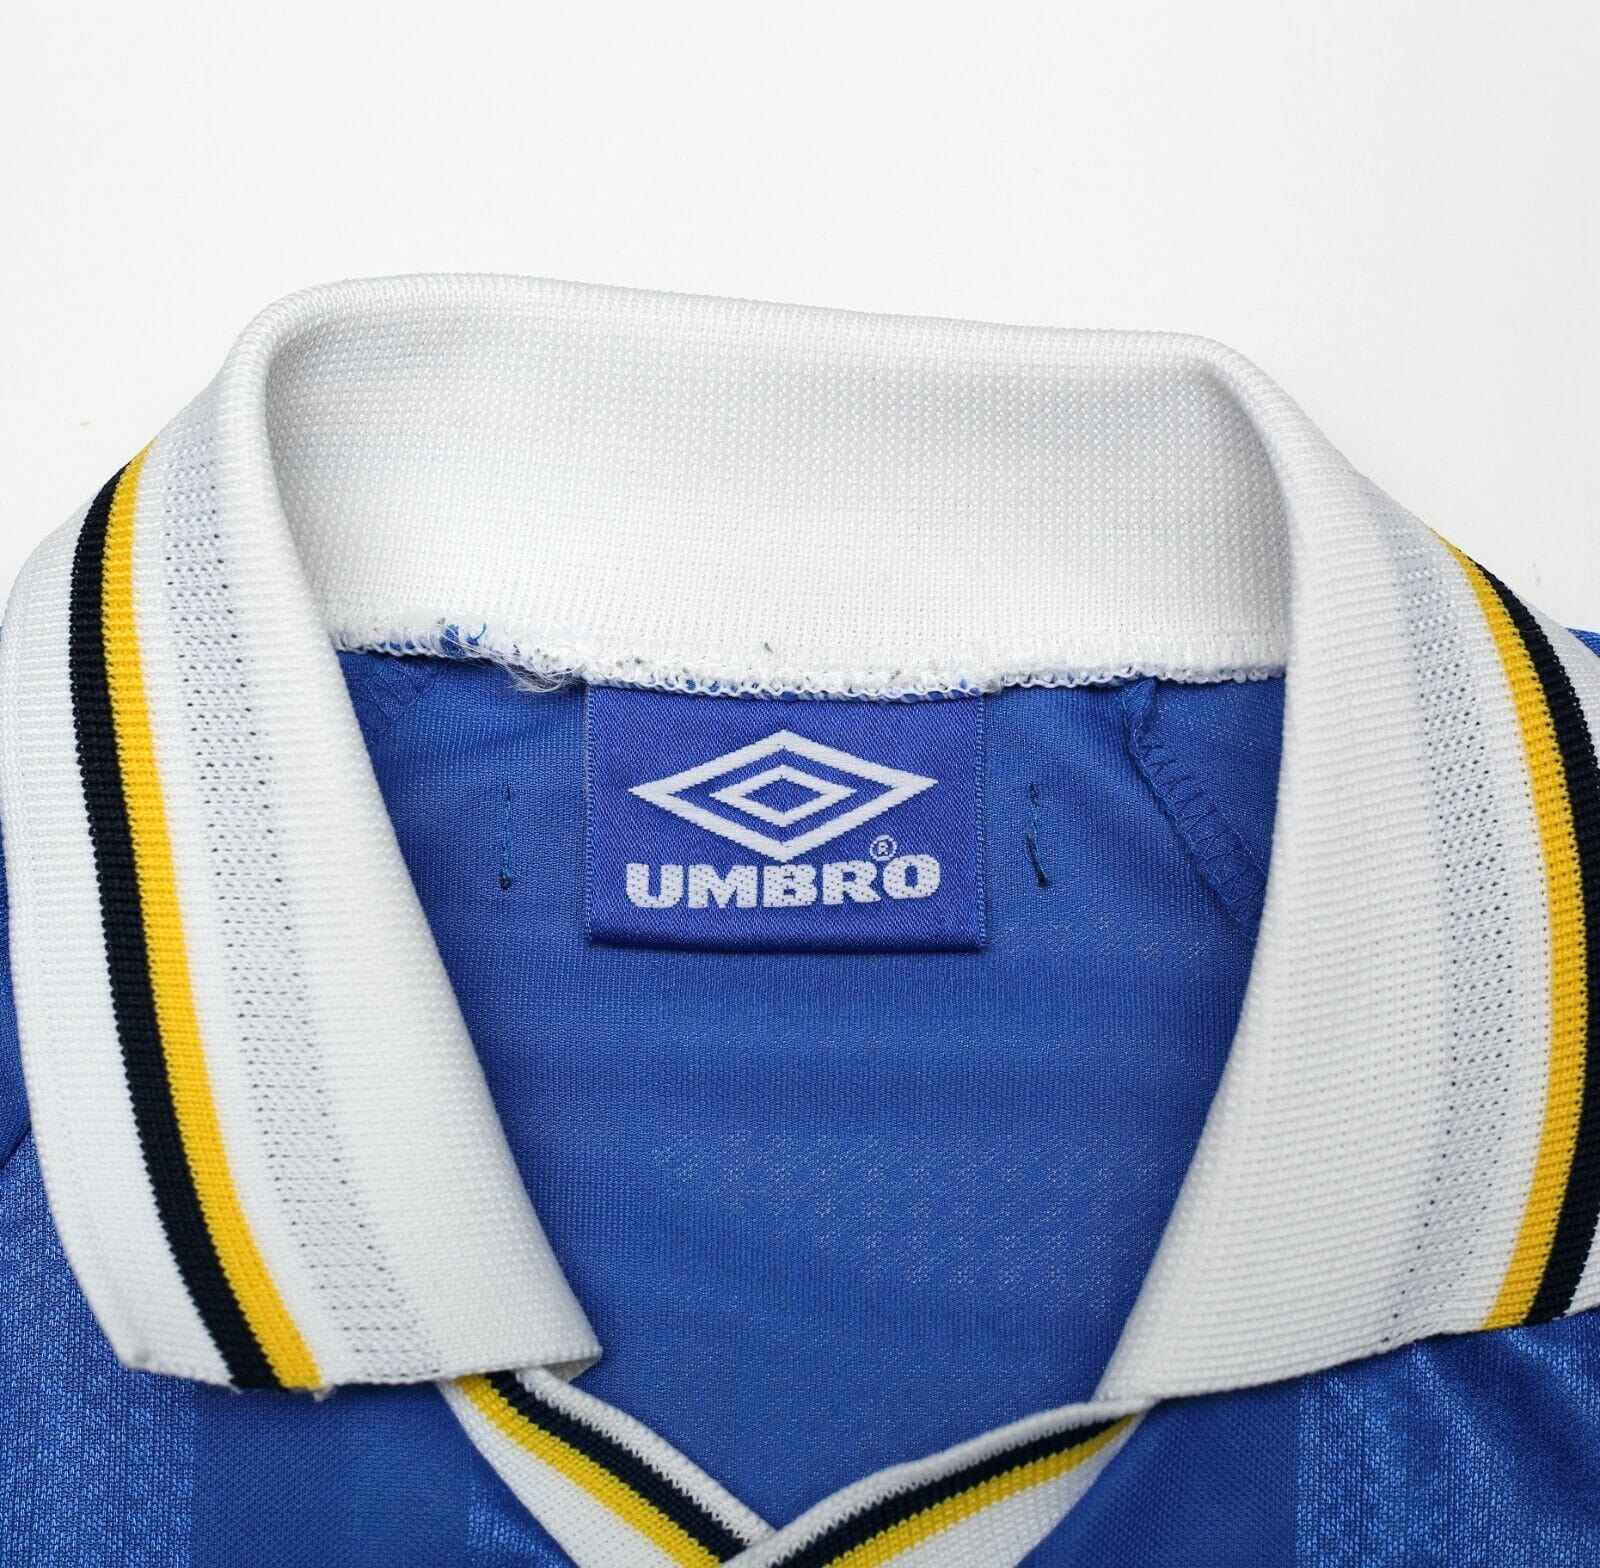 1997/99 VIALLI #9 Chelsea Vintage Umbro CUP WINNERS CUP FINAL Football -  Football Shirt Collective